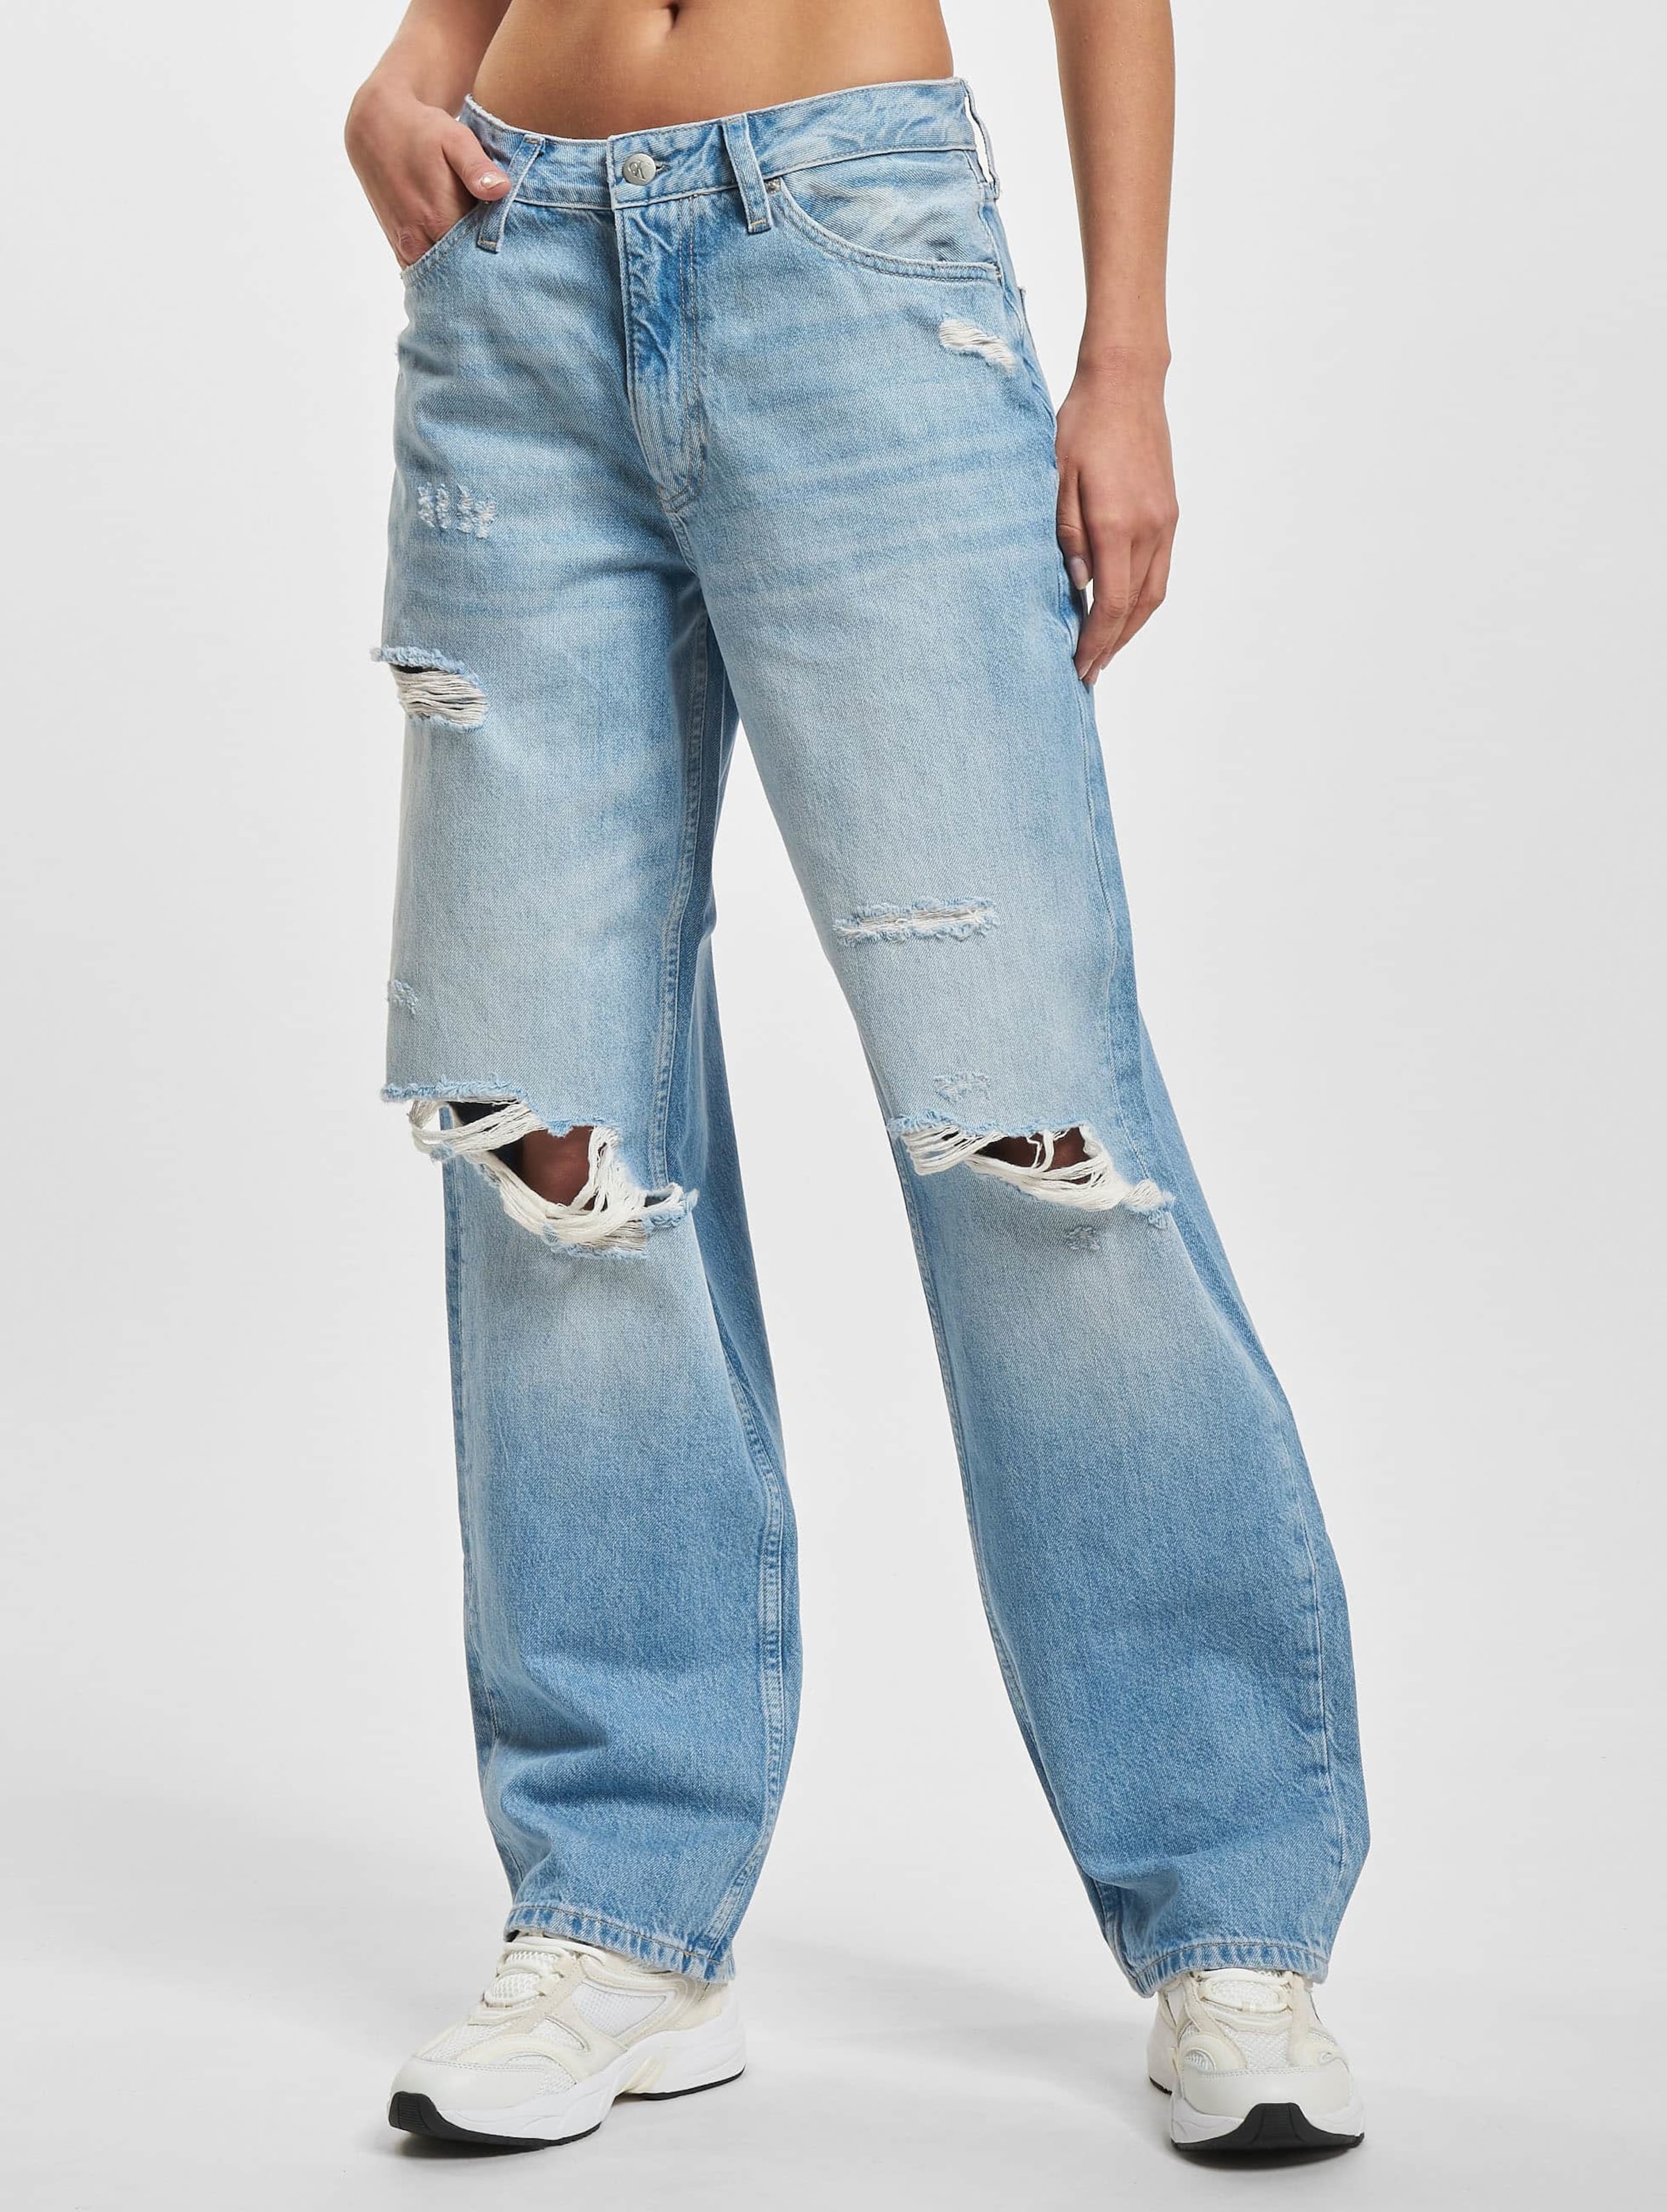 Calvin Klein Jeans 90s Straight Straight Fit Jeans